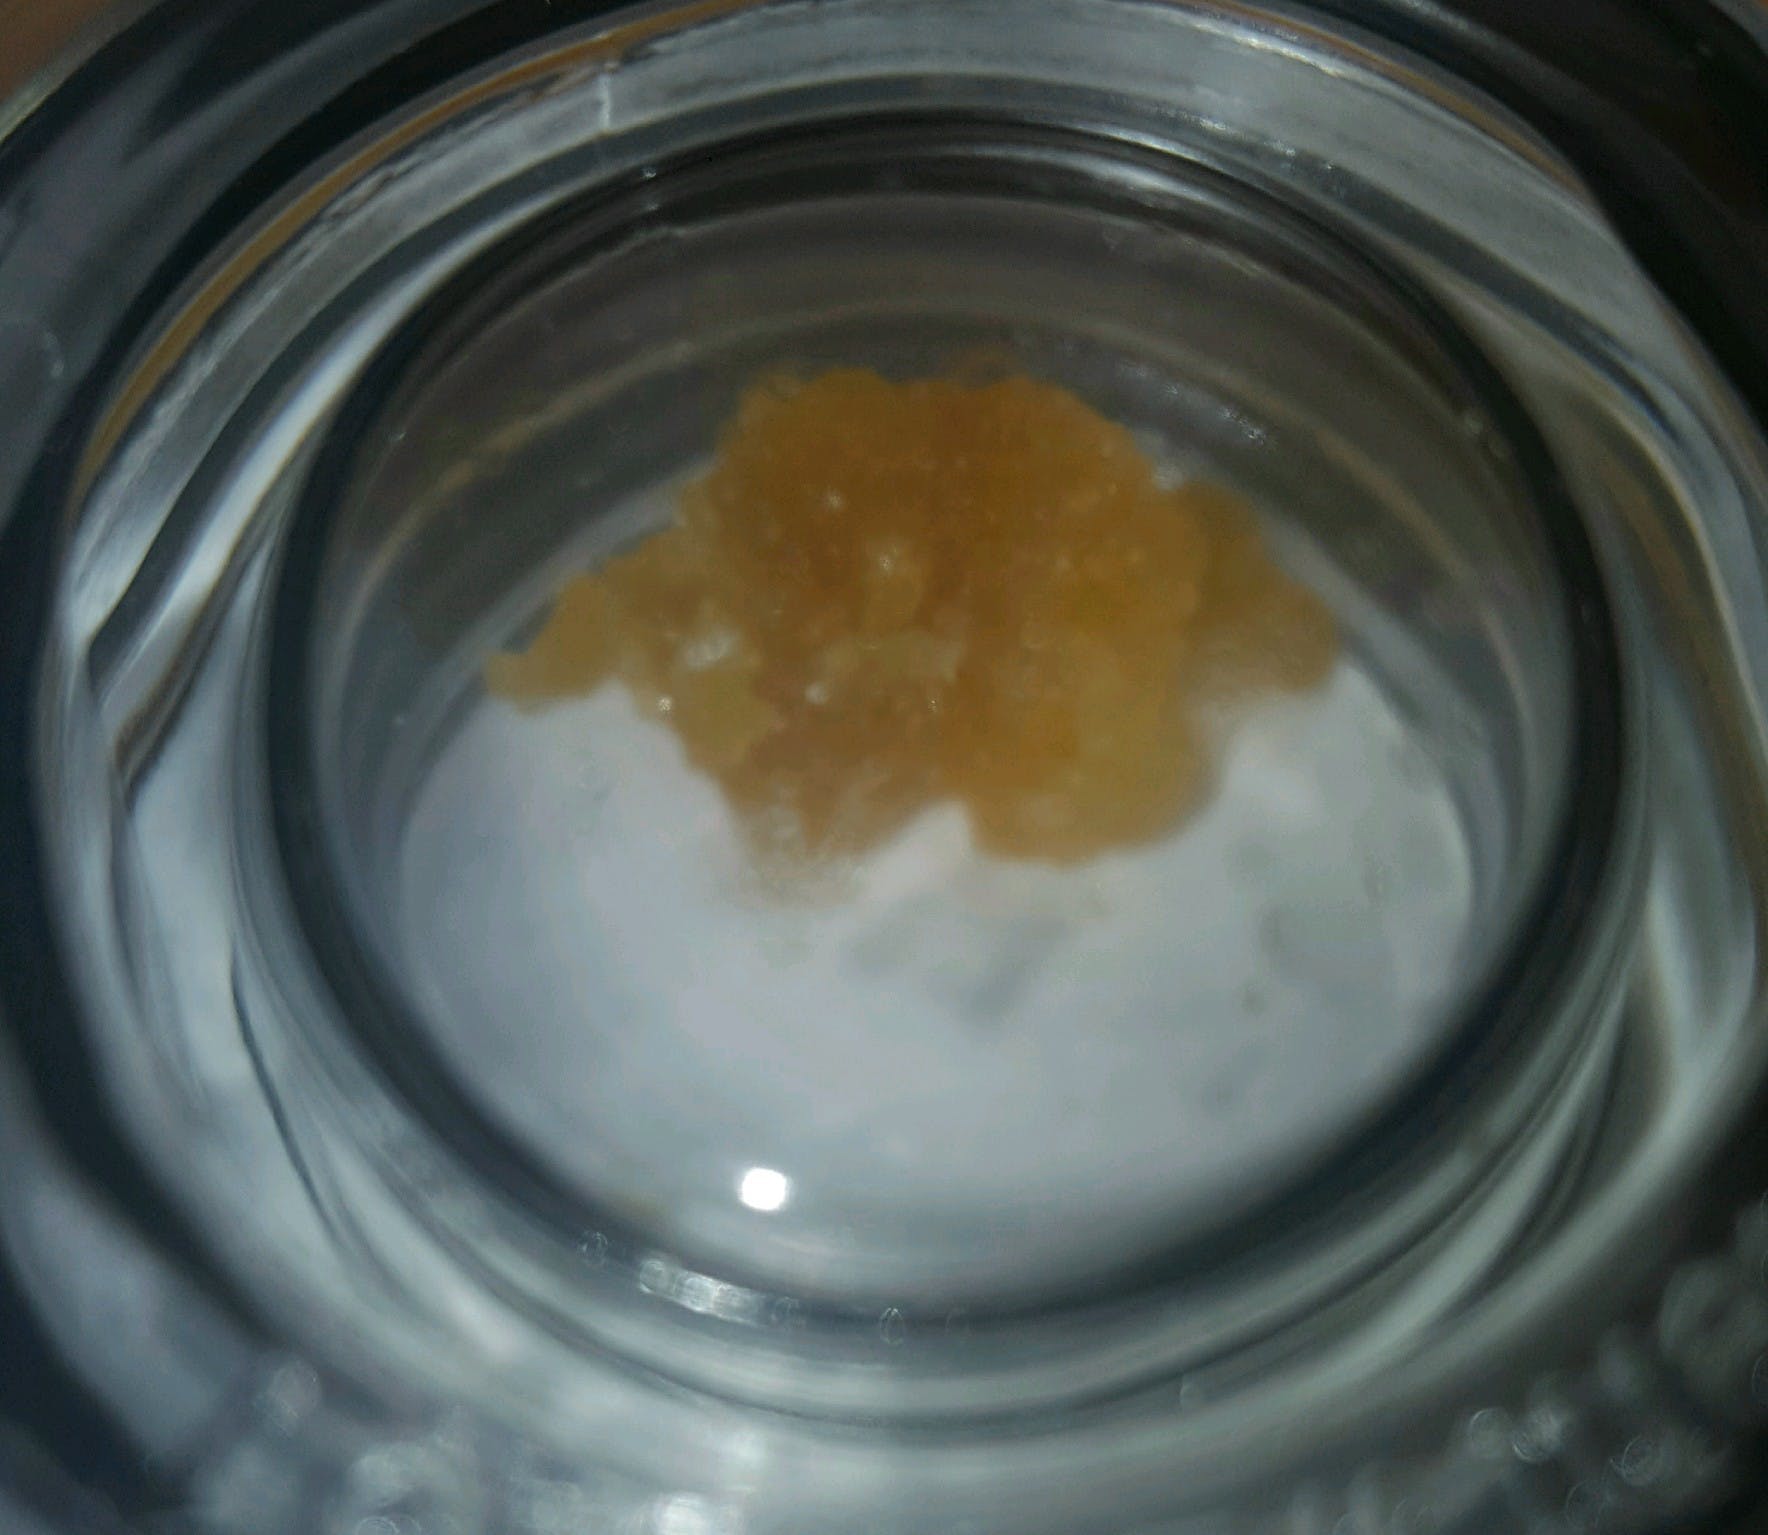 concentrate-pts-0-5g-full-spectrum-extract-banana-kush